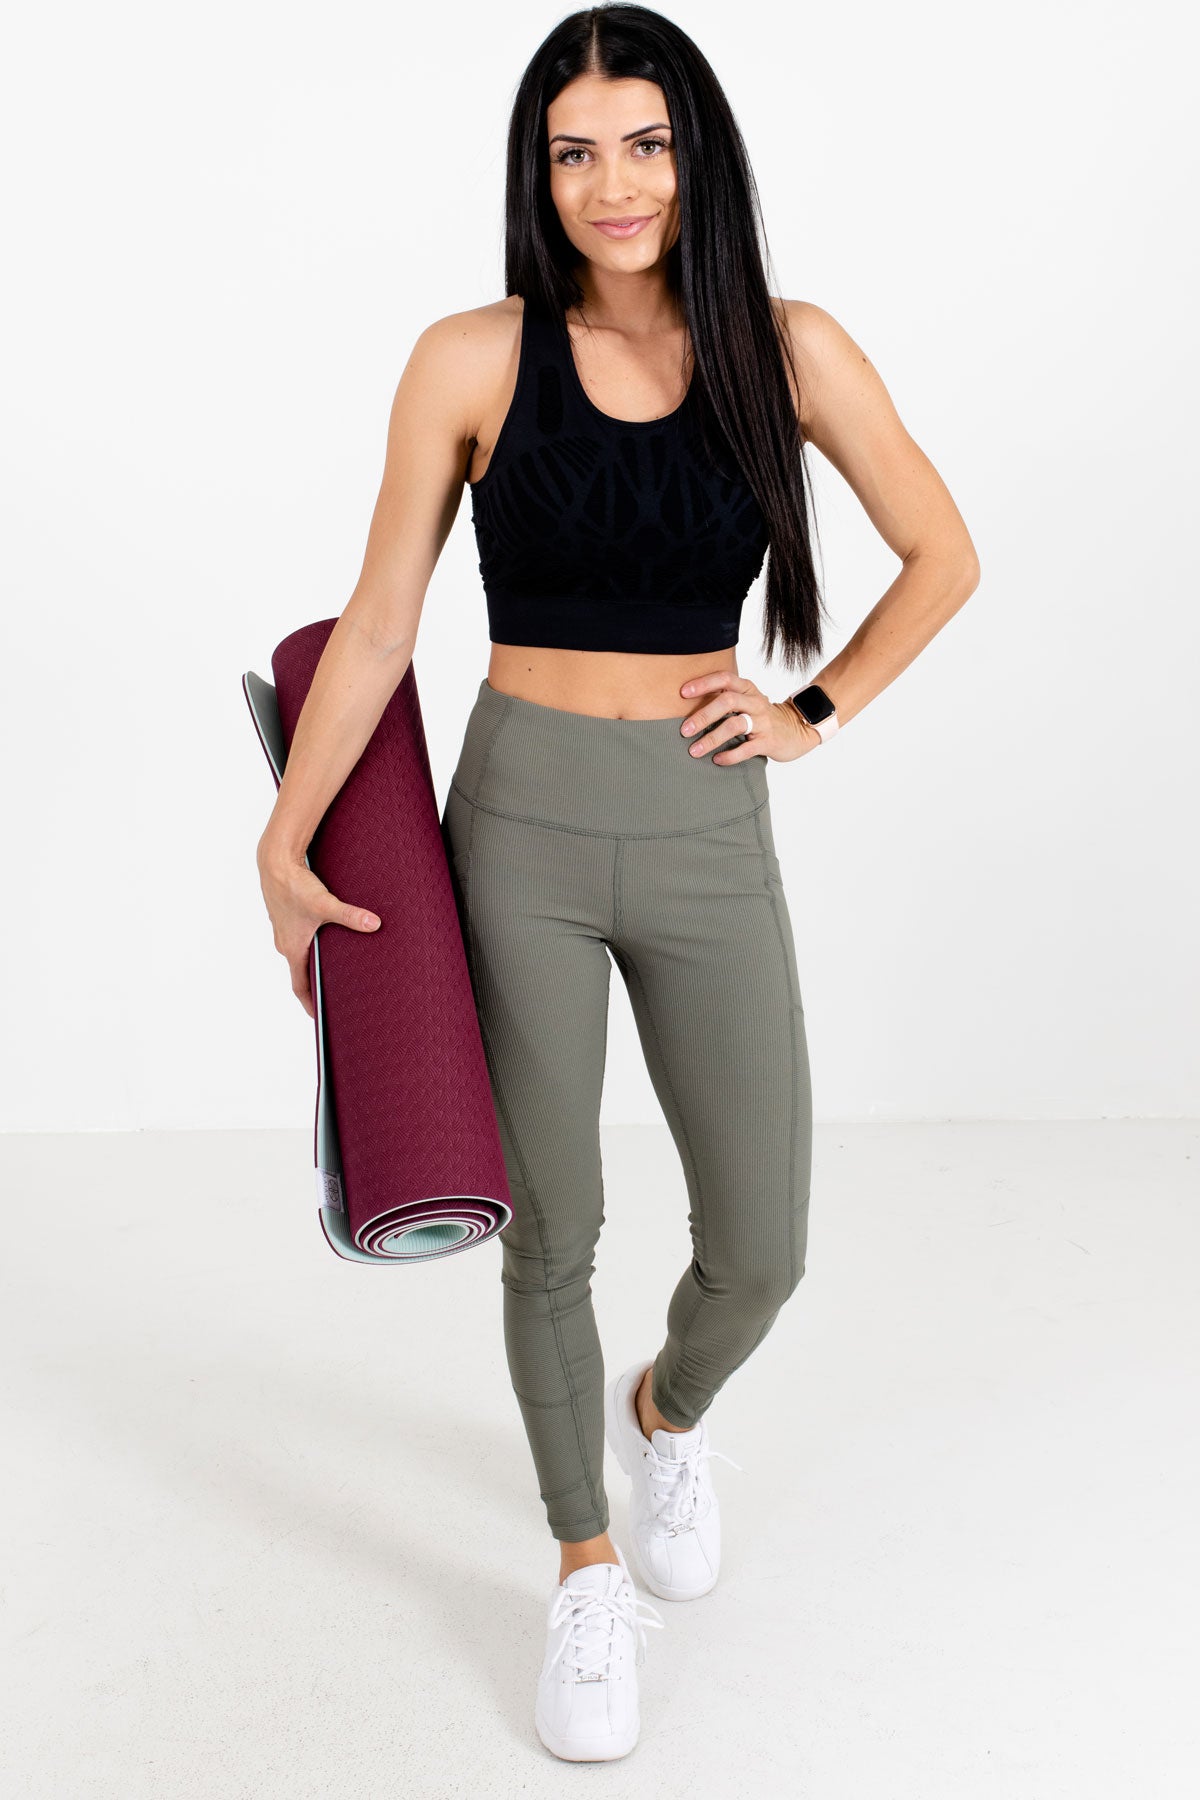 Women's Olive Green Workout Boutique Clothing